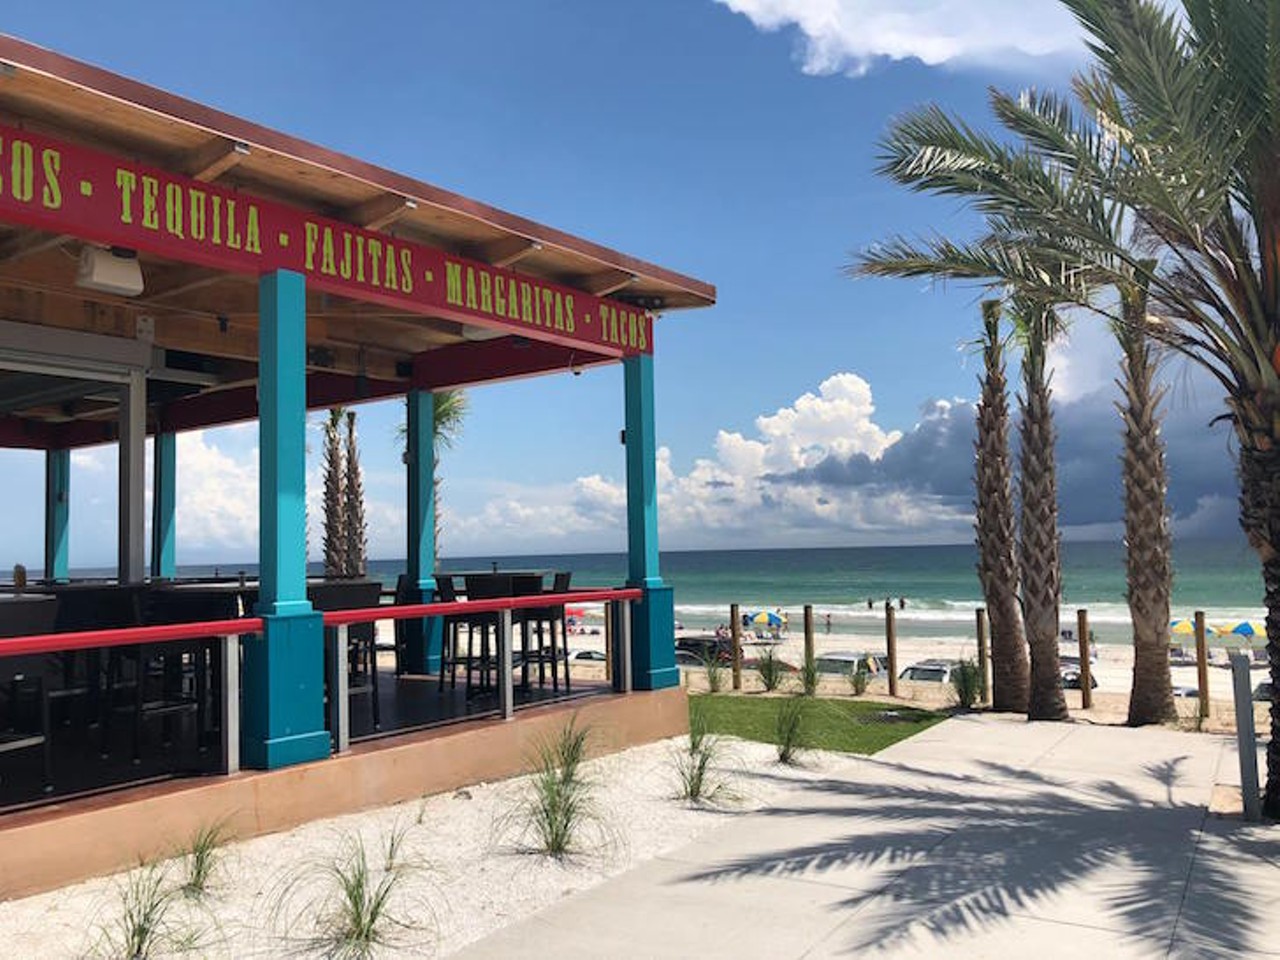 Cocina 214
451 S. Atlantic Avenue, Daytona Beach | (386) 456-3168
The drive out to Daytona is definitely worth the view. Grab a drink or something off the menu and enjoy the oceanfront sea breeze from the restaurant&#146;s patio deck.  
Photo via Cocina 214/Facebook</a